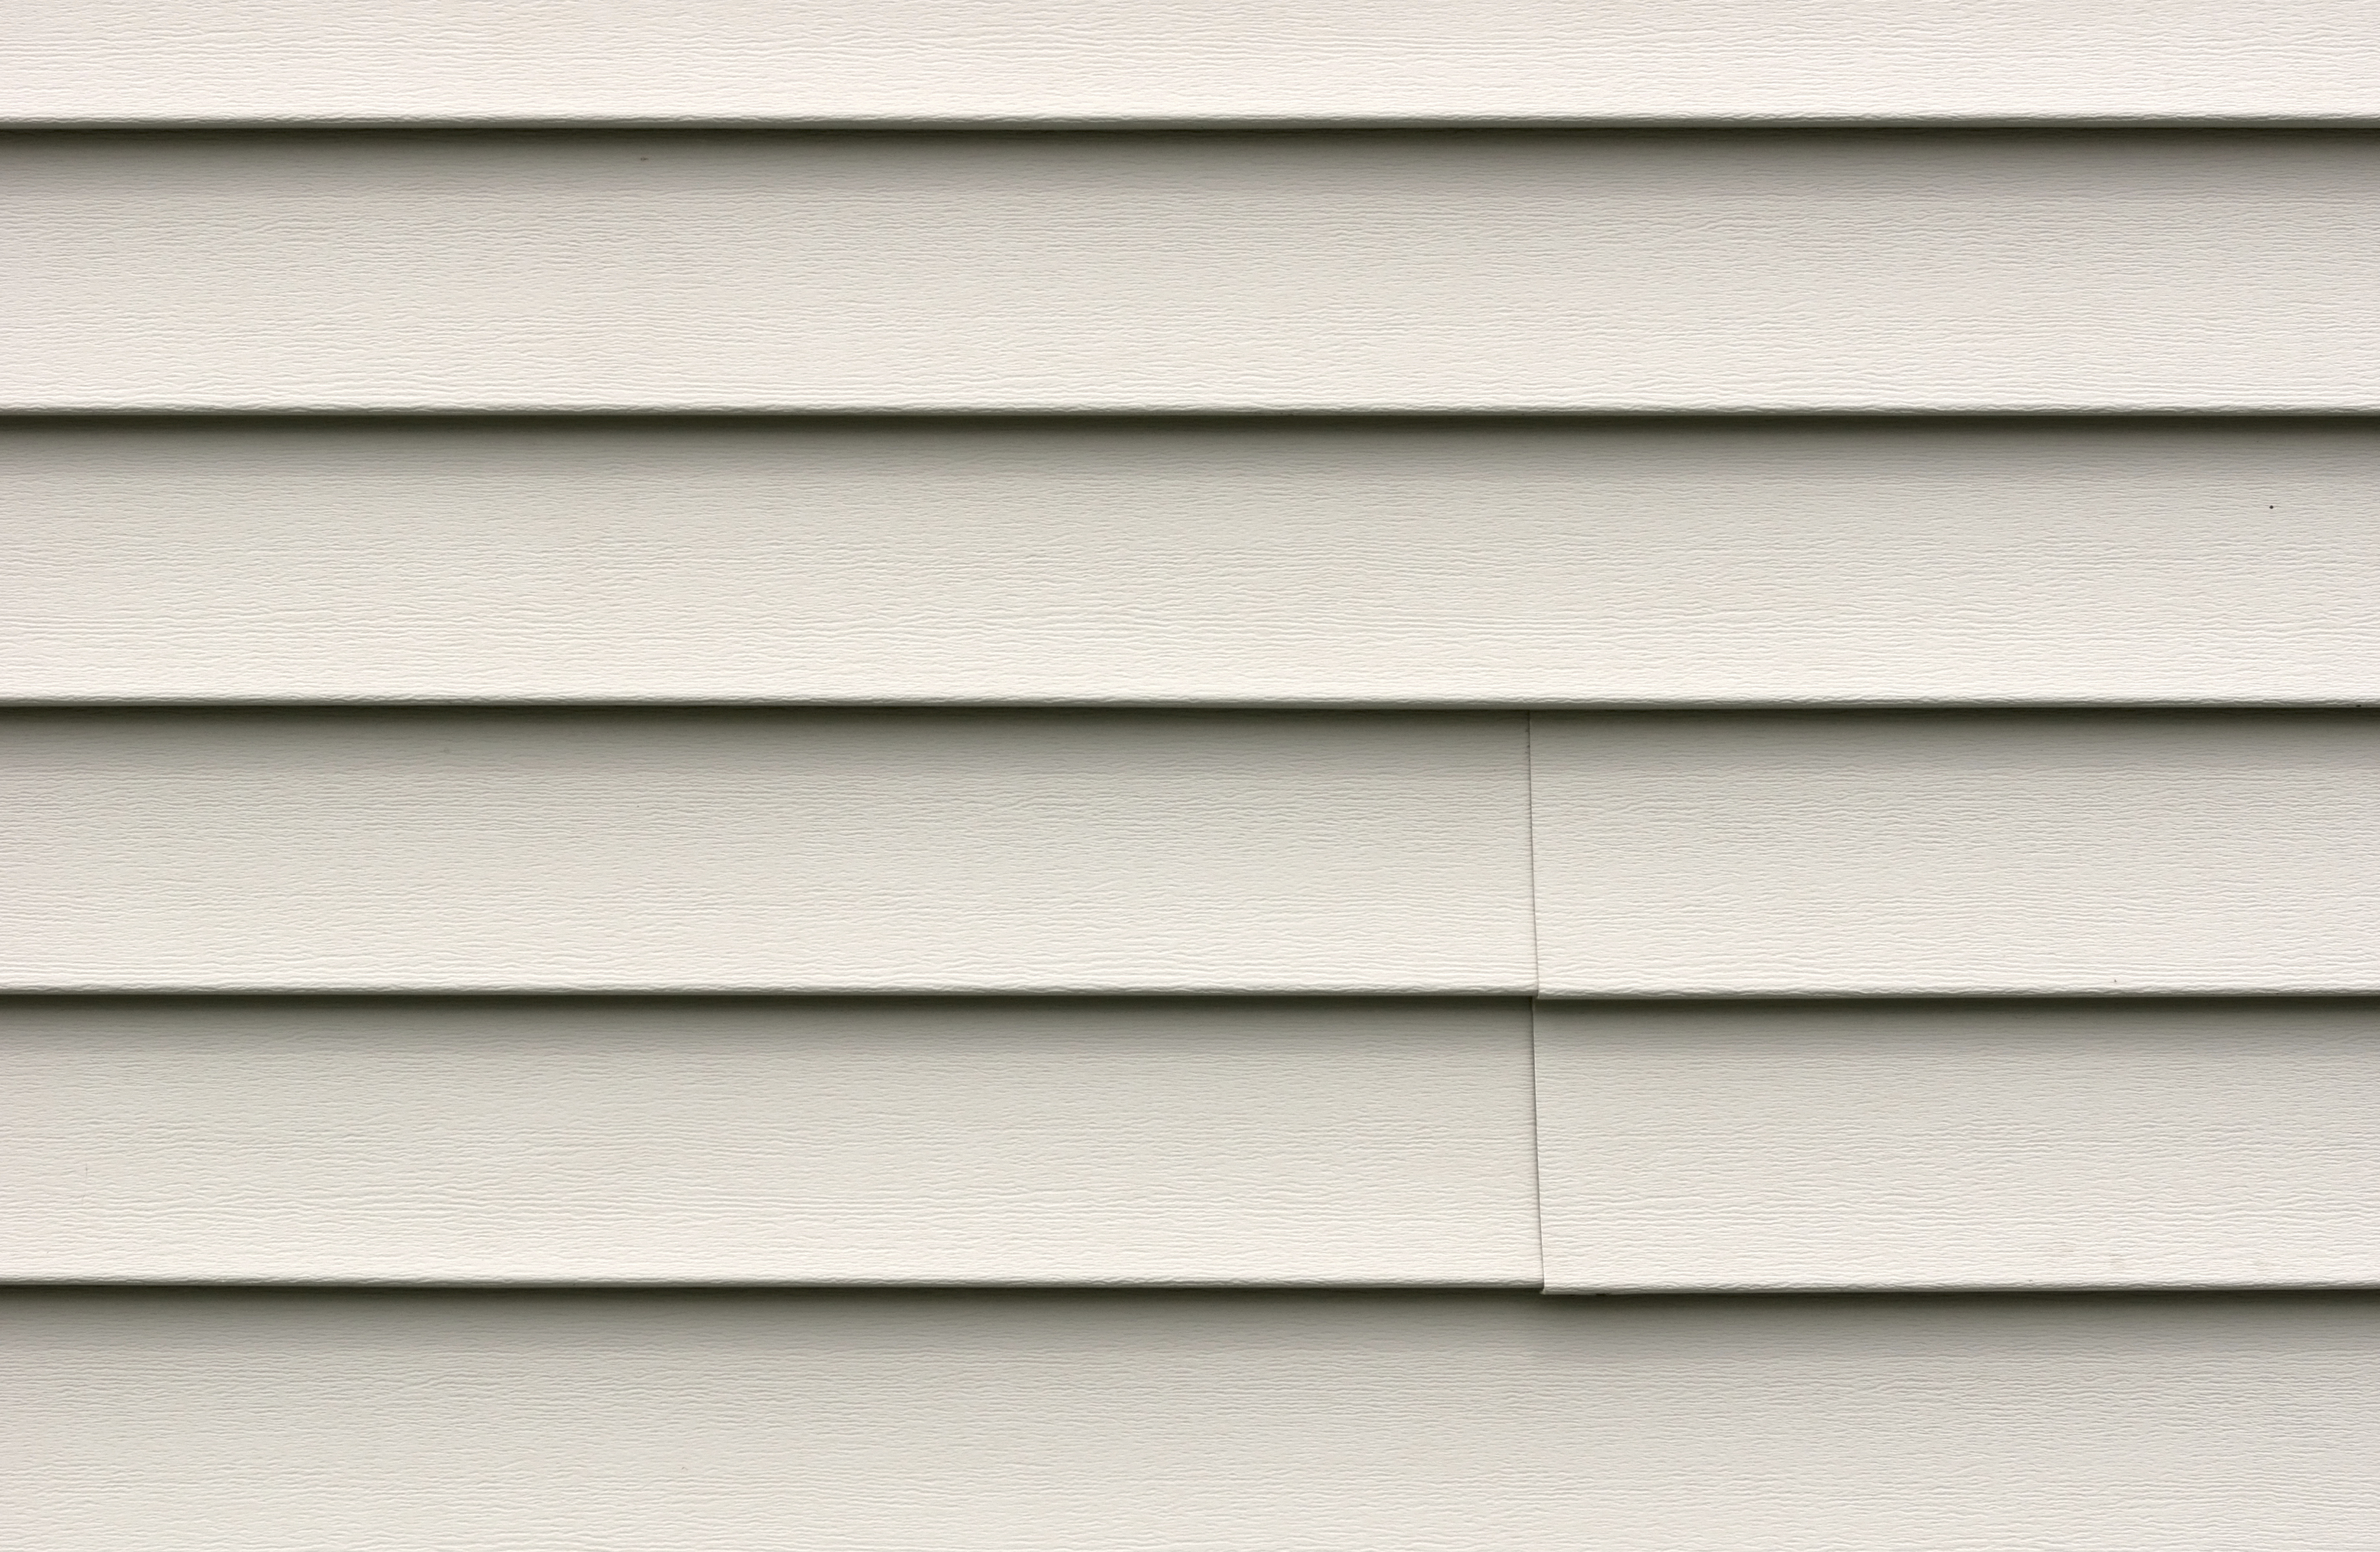 At Home: Adhesive tape fixes holes in vinyl siding